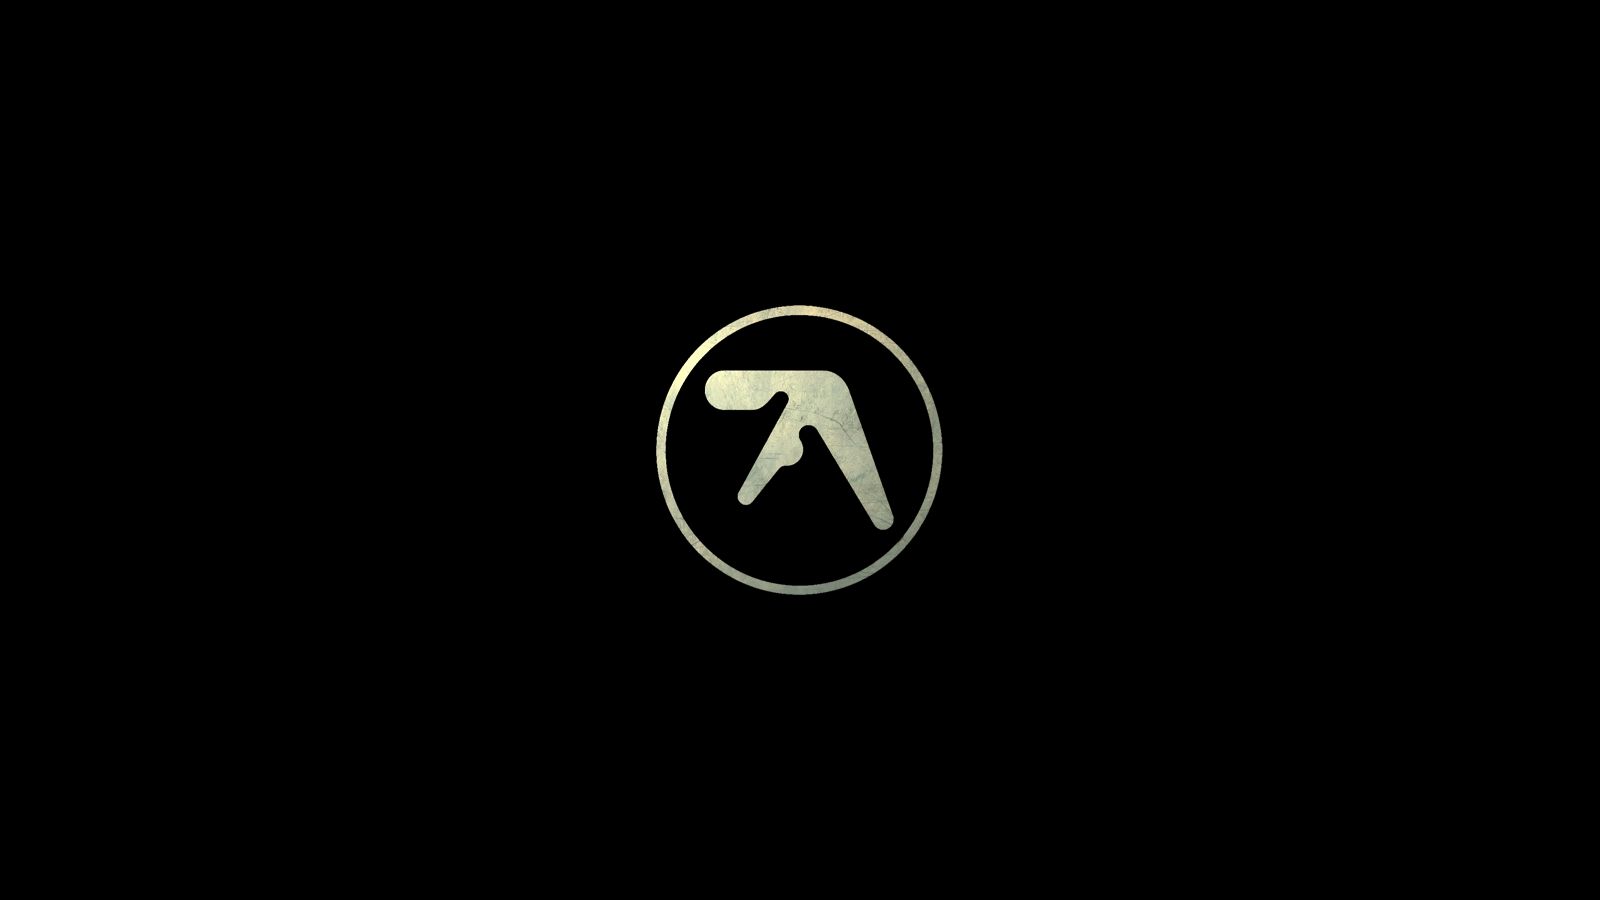 Aphex Twin wallpapers for desktop, download free Aphex Twin pictures and  backgrounds for PC 